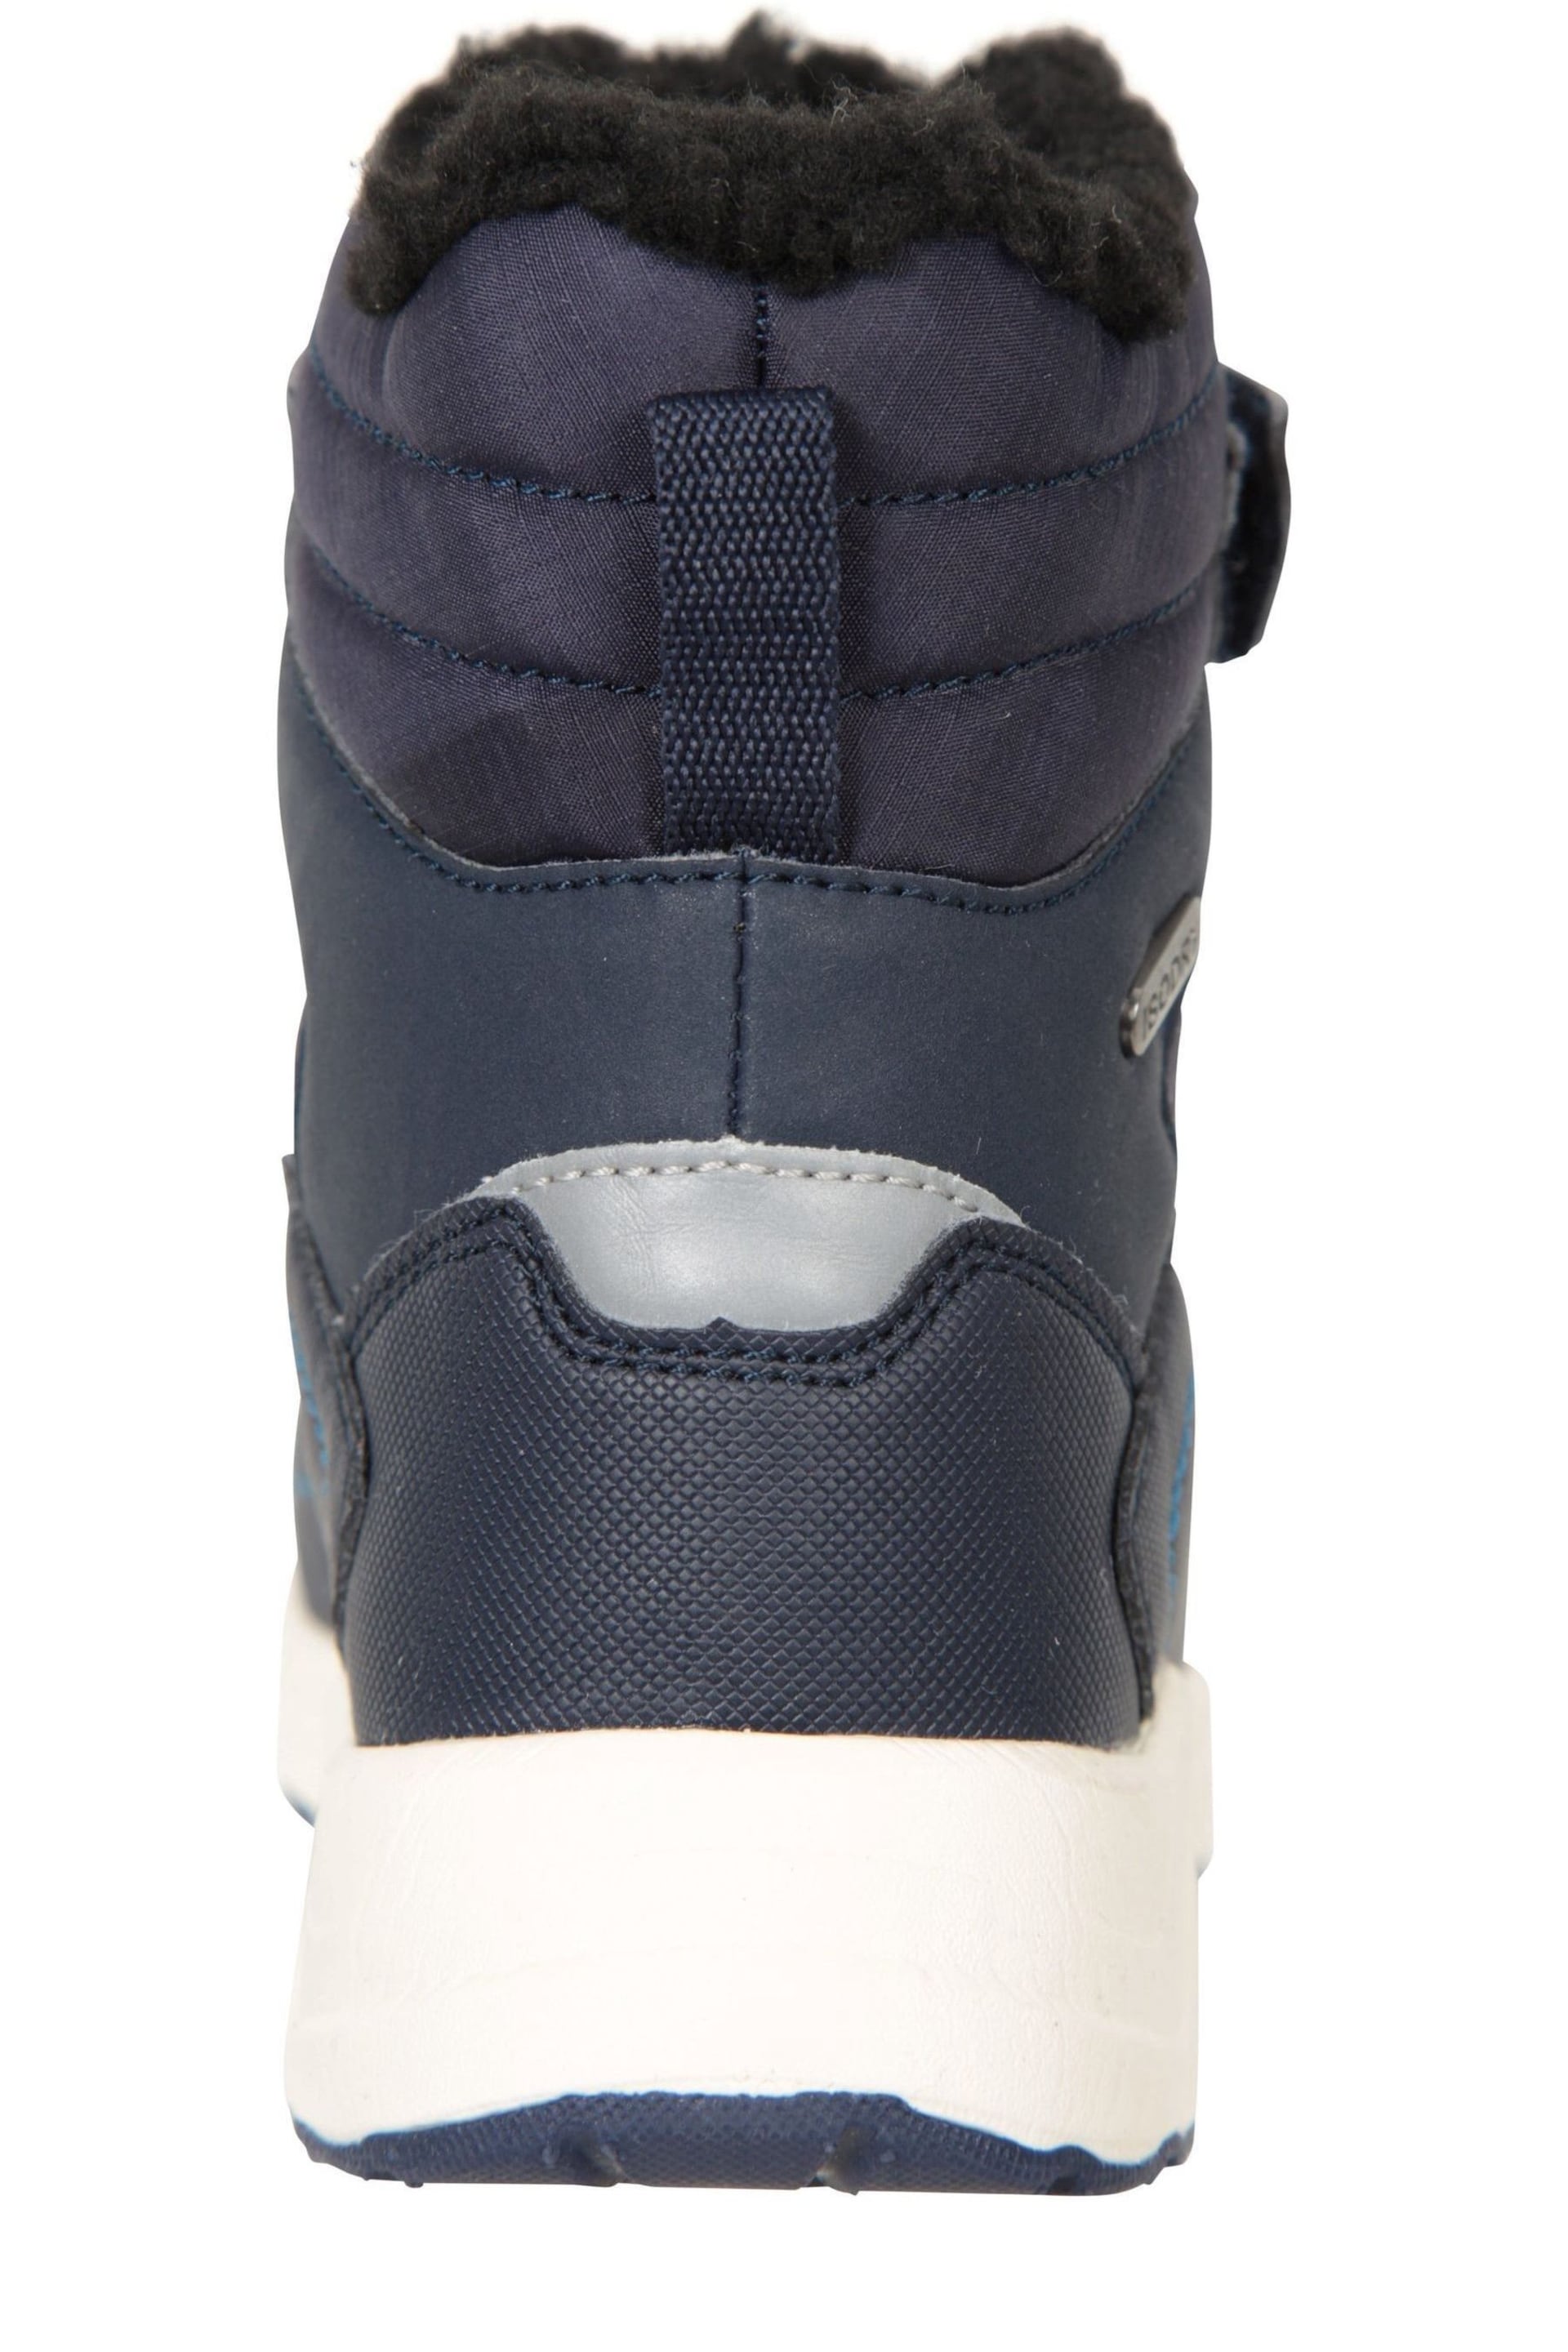 Mountain Warehouse Blue Kids Denver Waterproof Snow Boots - Image 4 of 5